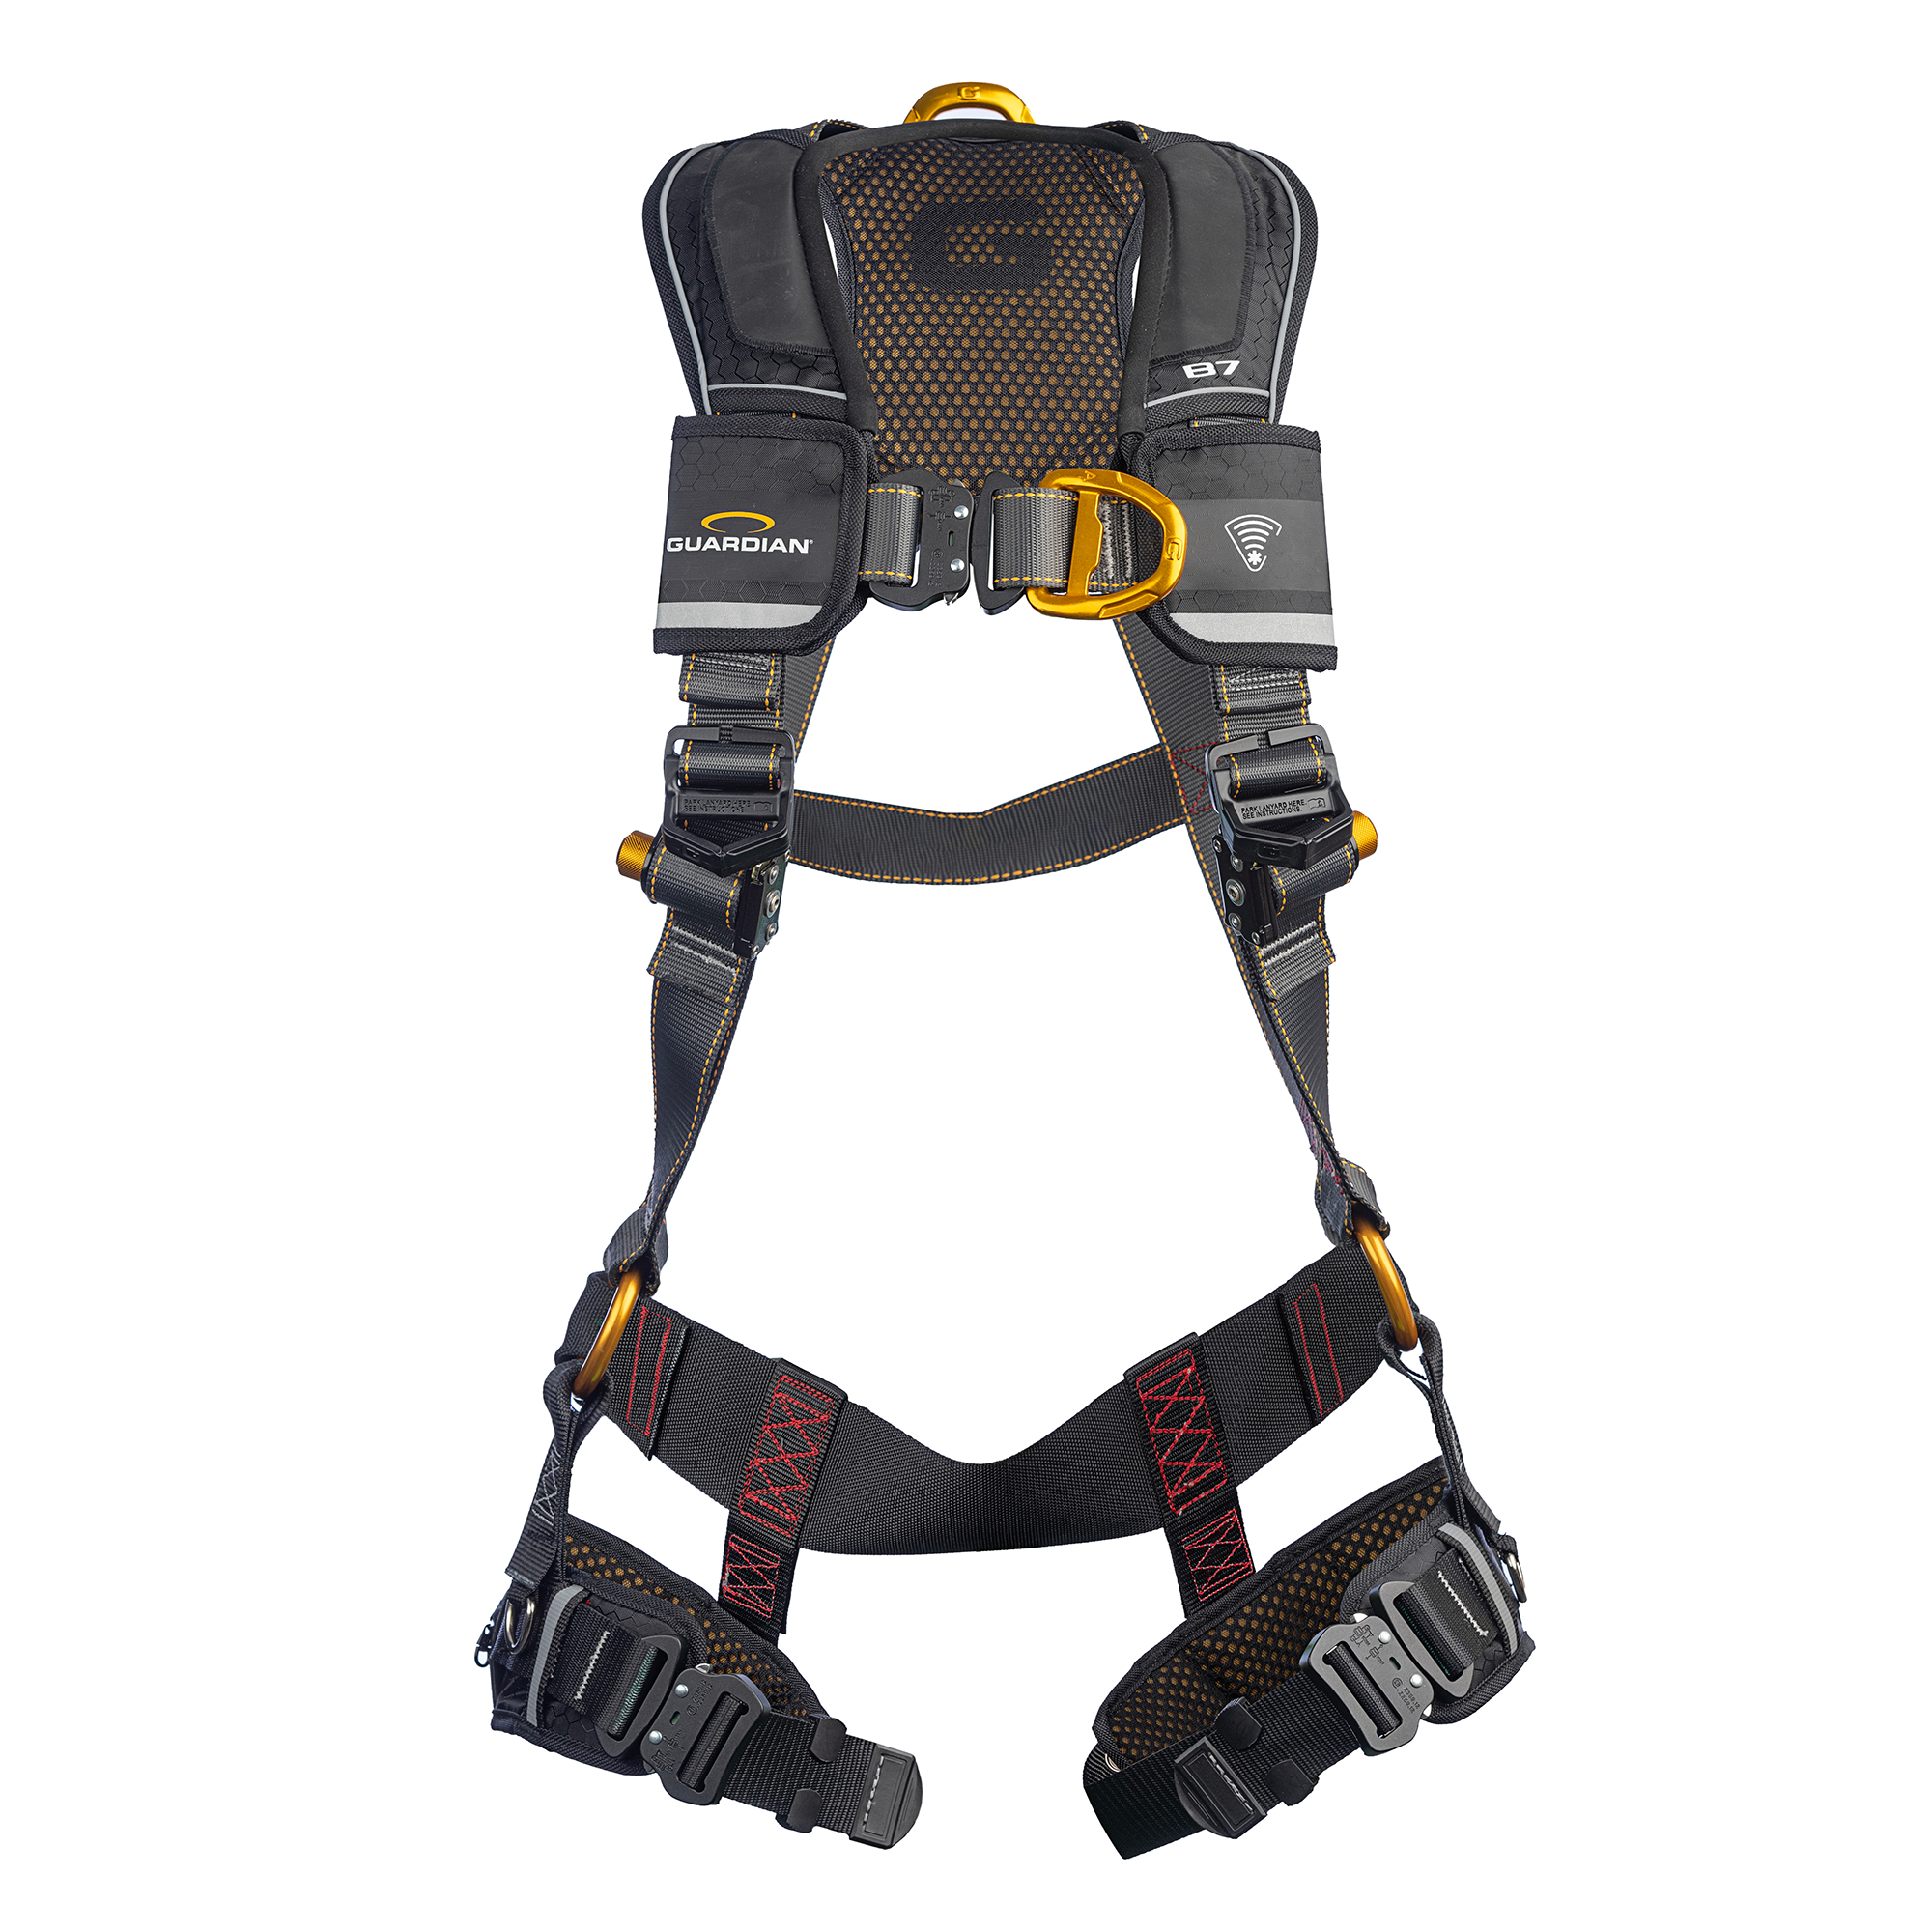 Guardian B7 Comfort Full-Body Harness, Quick-Connect Chest and